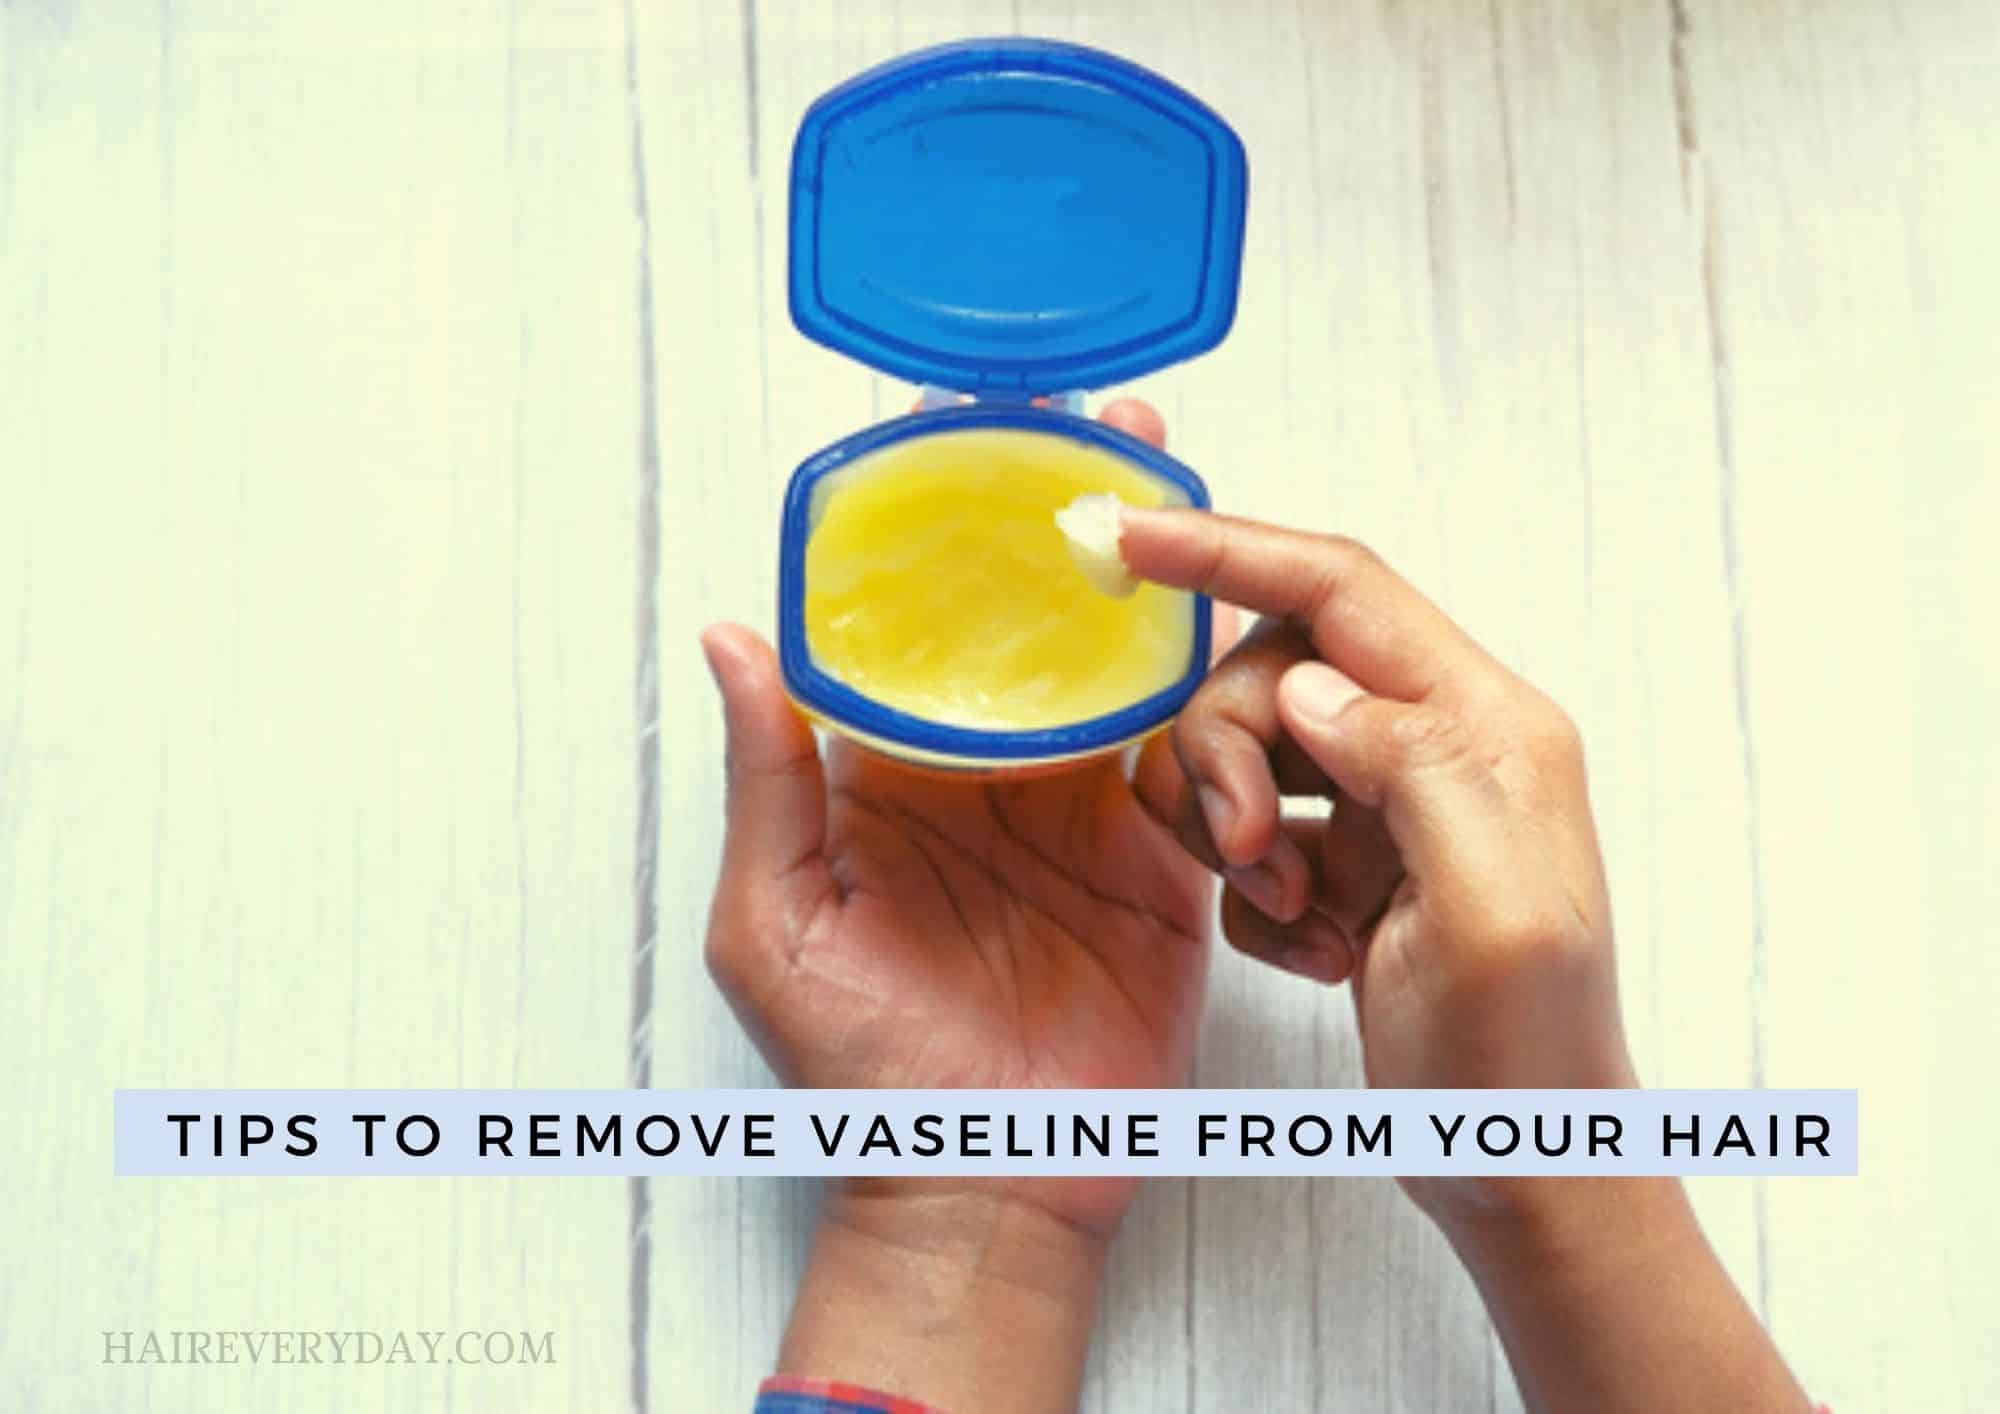 How To Get Vaseline Out Of Your Hair | 13 Easy Tips To Try Today - Hair  Everyday Review